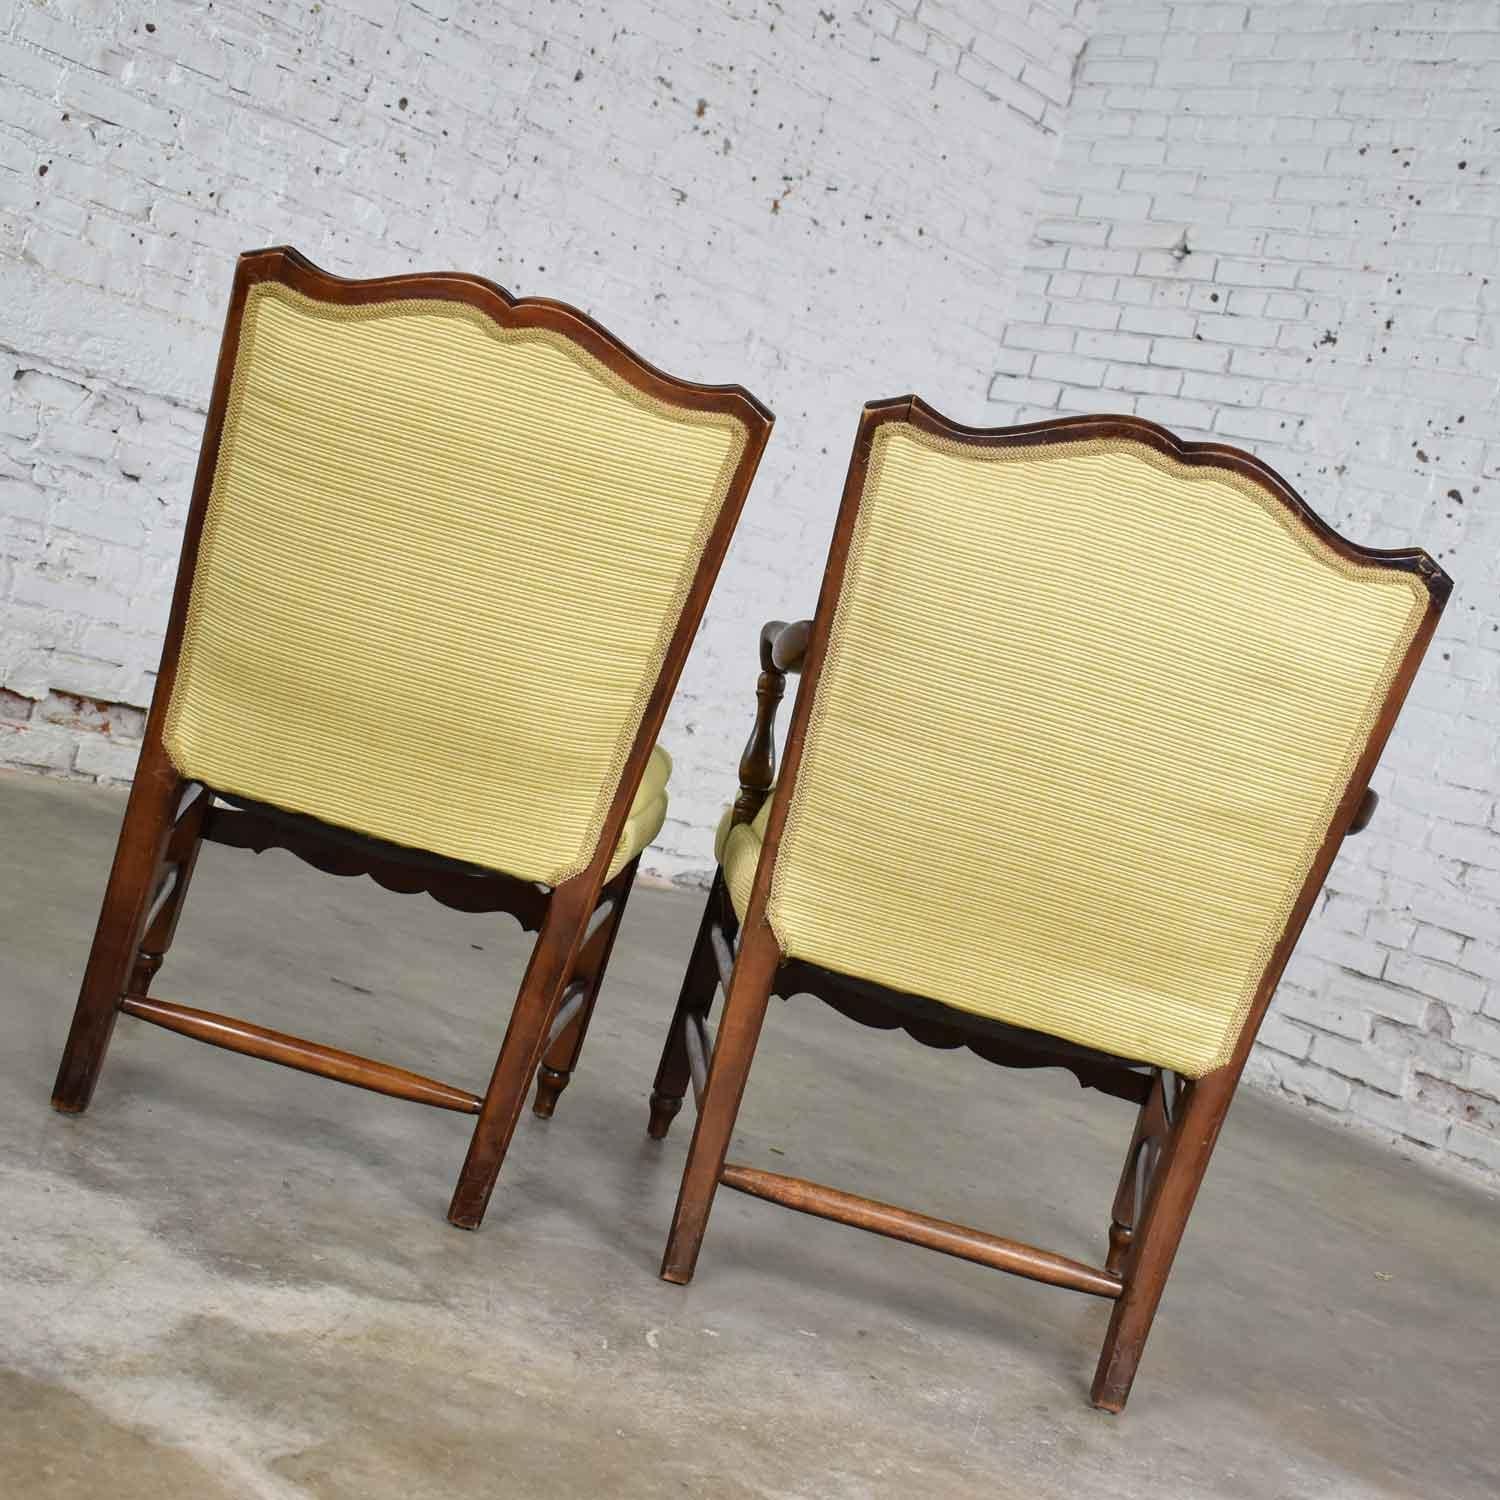 Fabric Pair of Georgian Revival His and Hers Accent Chairs in Golden Yellow